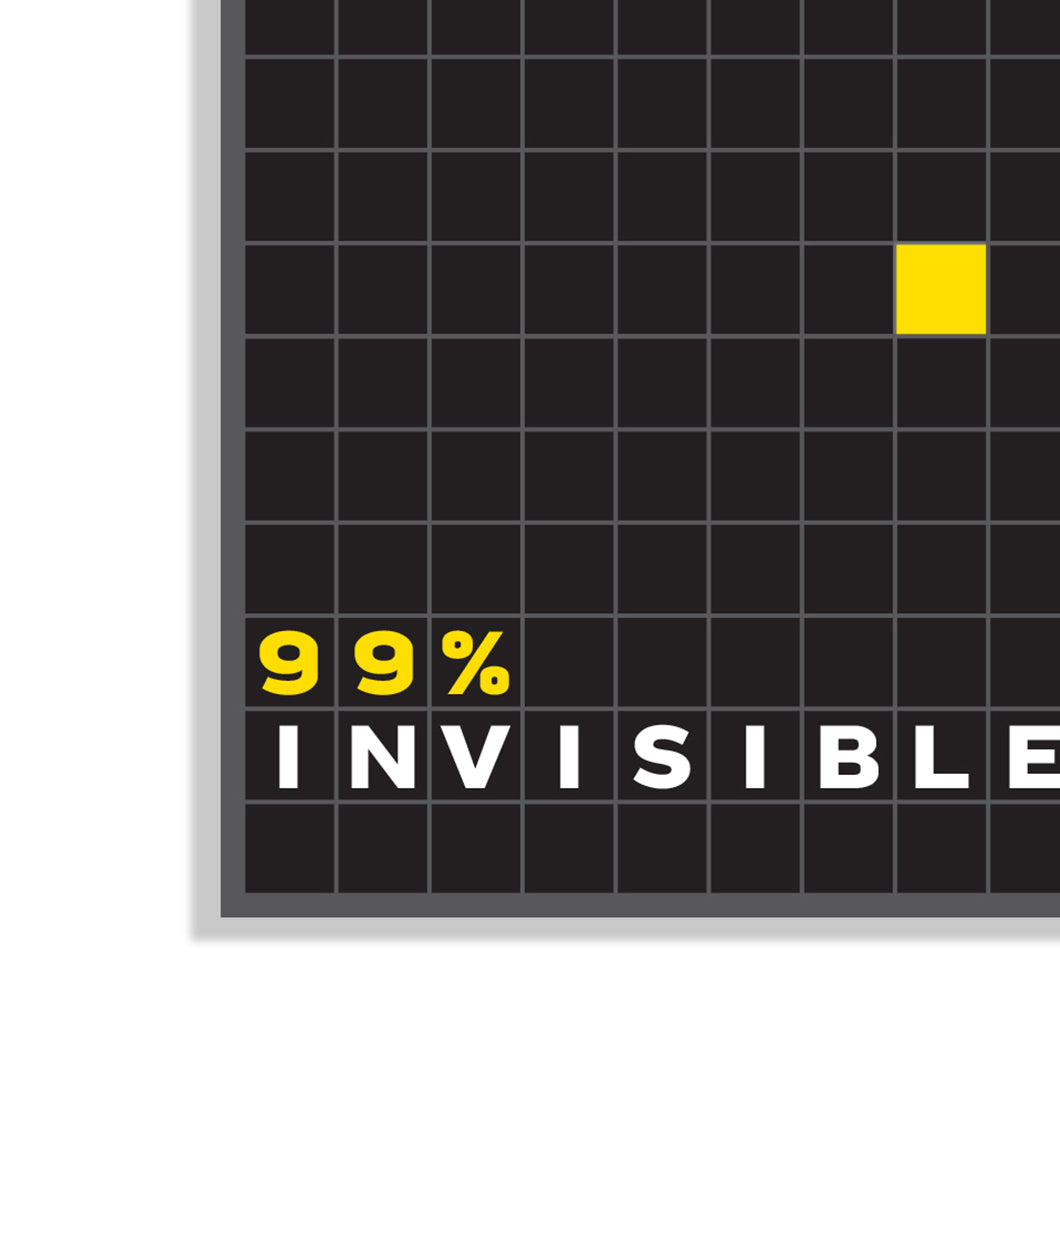 Rectangular sticker split into a grid of all black squares except for 1 yellow square. Includes white and yellow words "99% Invisible"